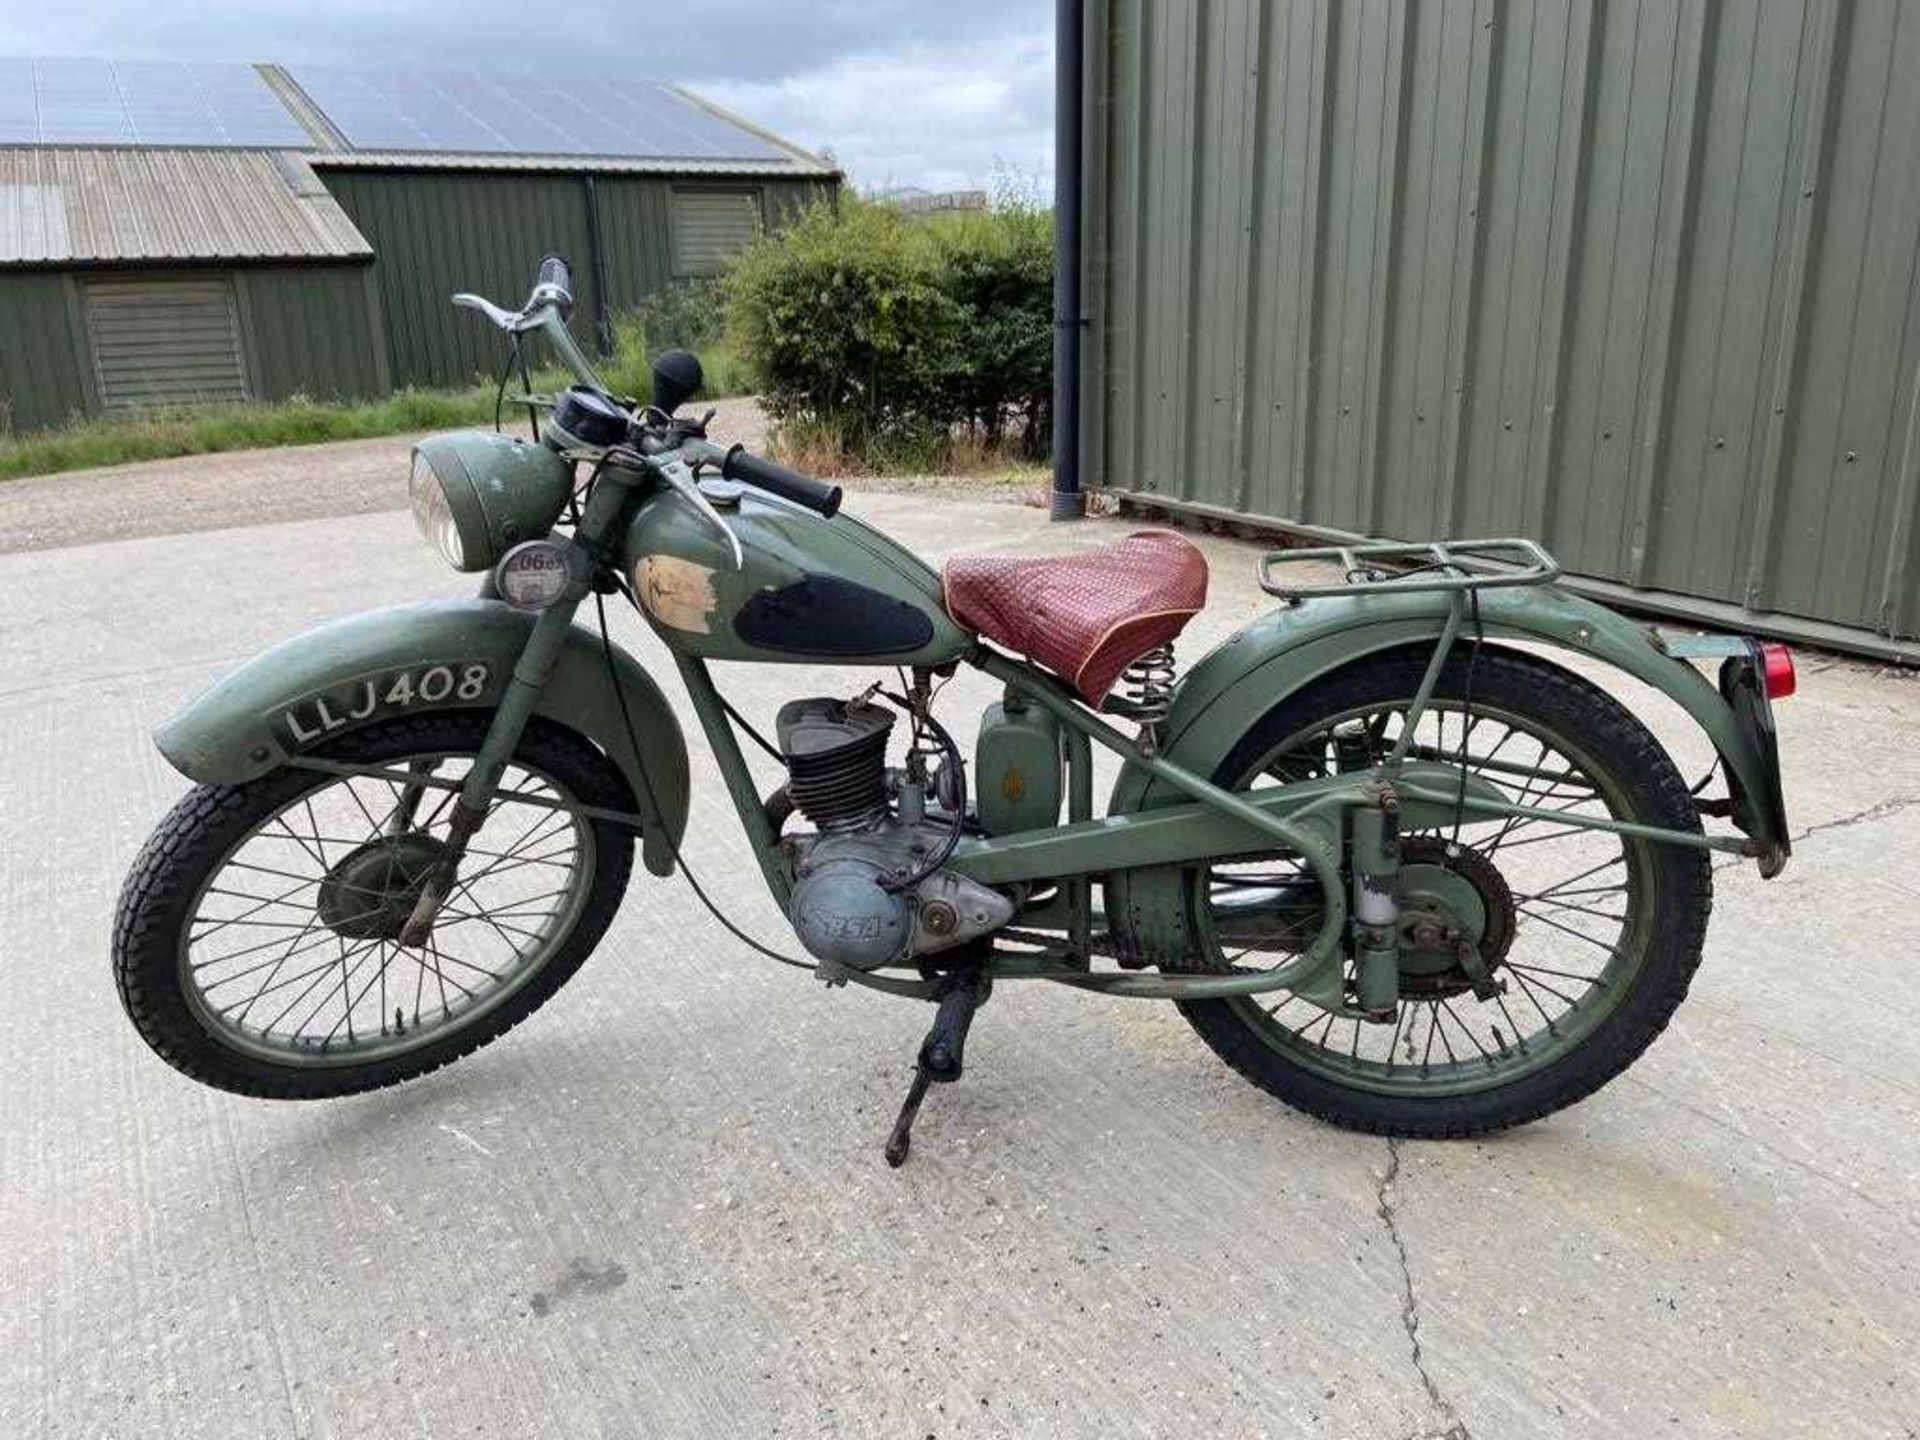 A 1951 BSA 125cc motorcycle Registration No. LLJ 408 in green Chassis No. YD1S-63093 Engine No.